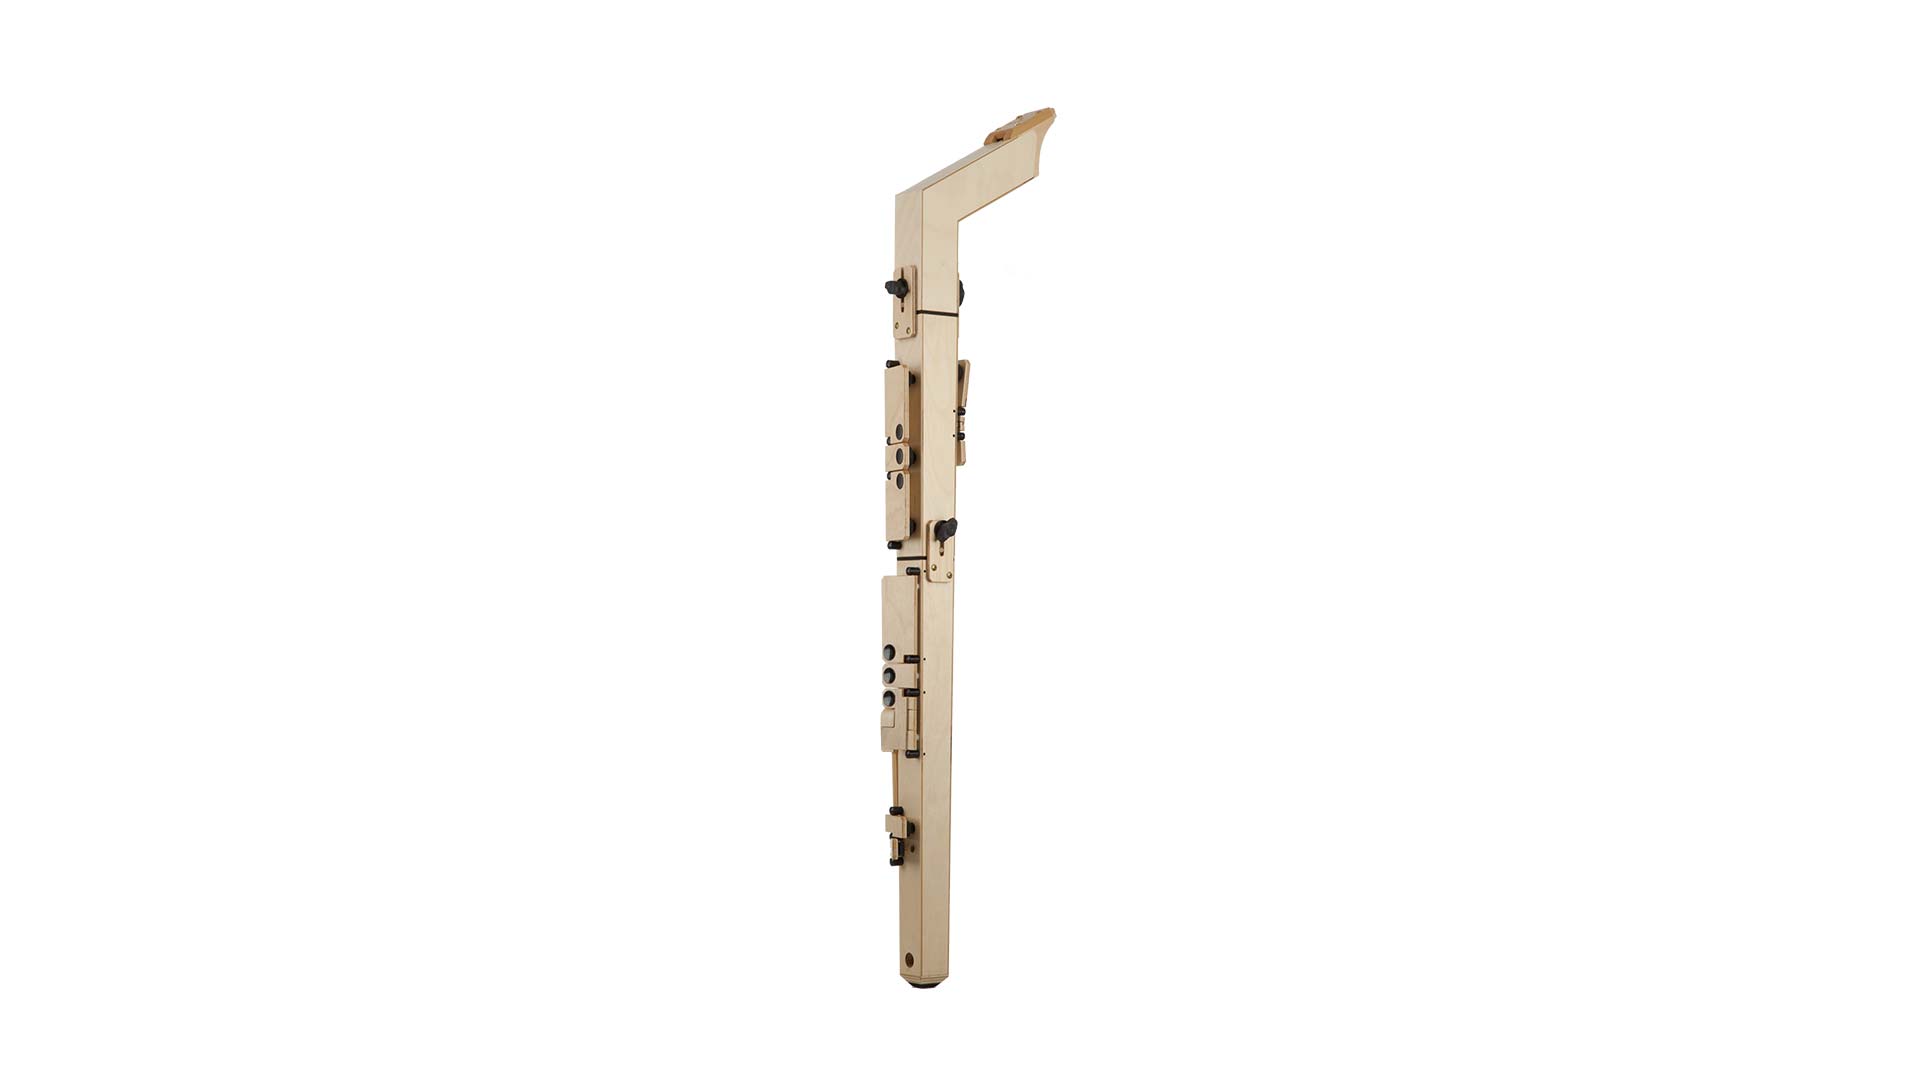 Paetzold by Kunath, basset recorder in f, "Master", "Direct Blow", 442 Hz, natural, birch plywood